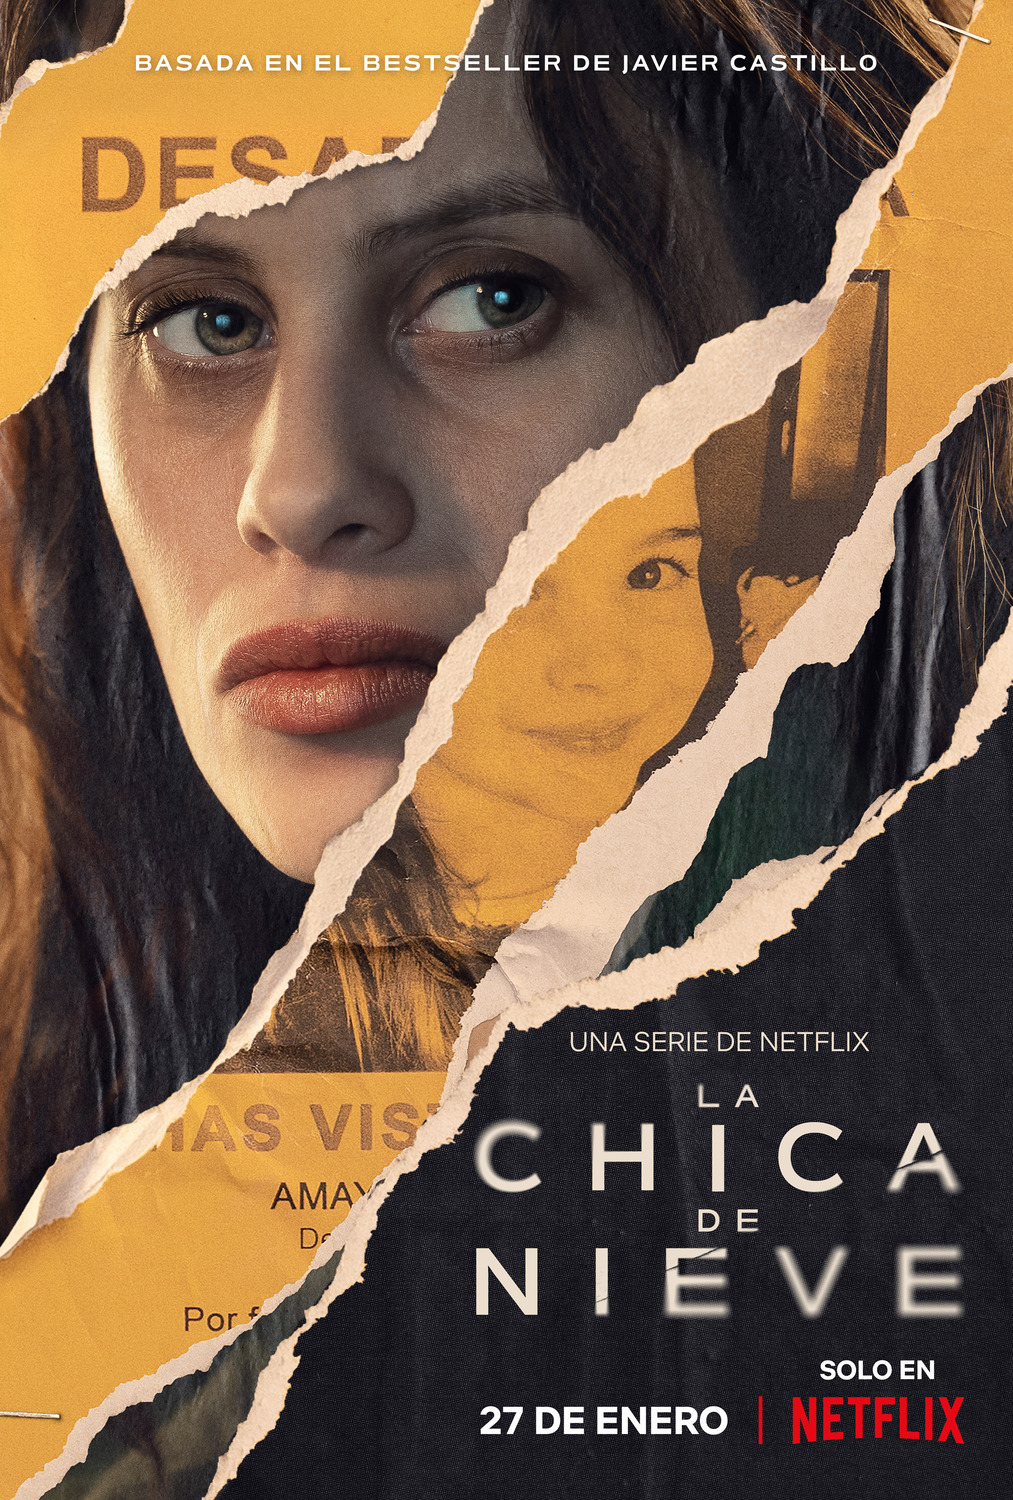 Extra Large TV Poster Image for La chica de nieve (#3 of 6)